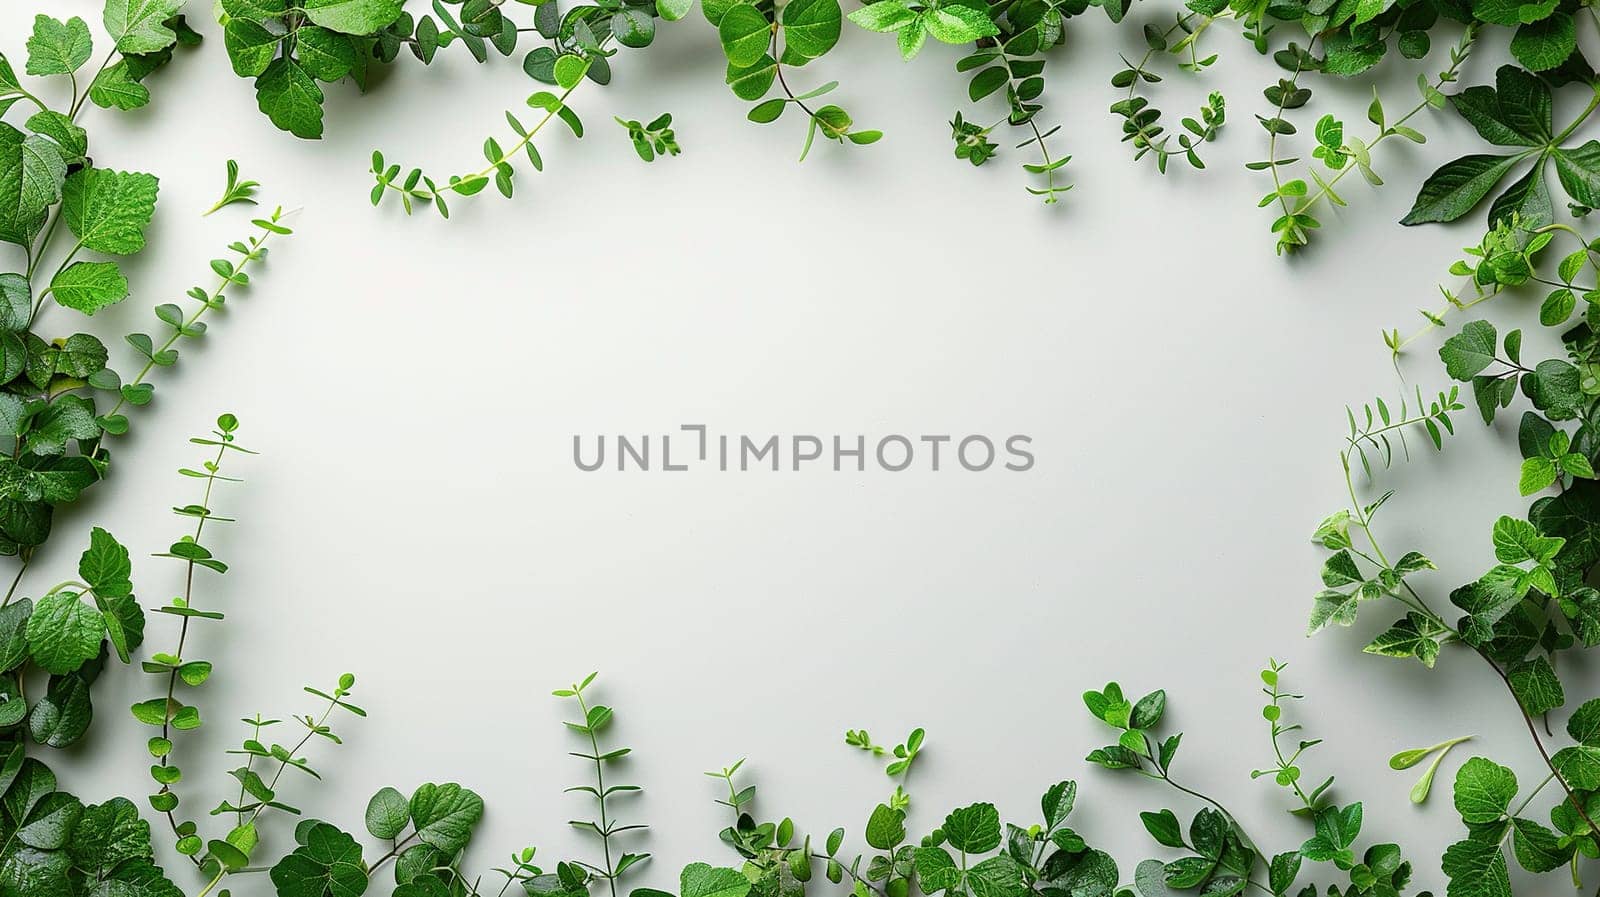 Modern white green background with greenery frame. Cover background for website design, social media advertising banner, flyer, invitation card. Generated by artificial intelligence by Vovmar